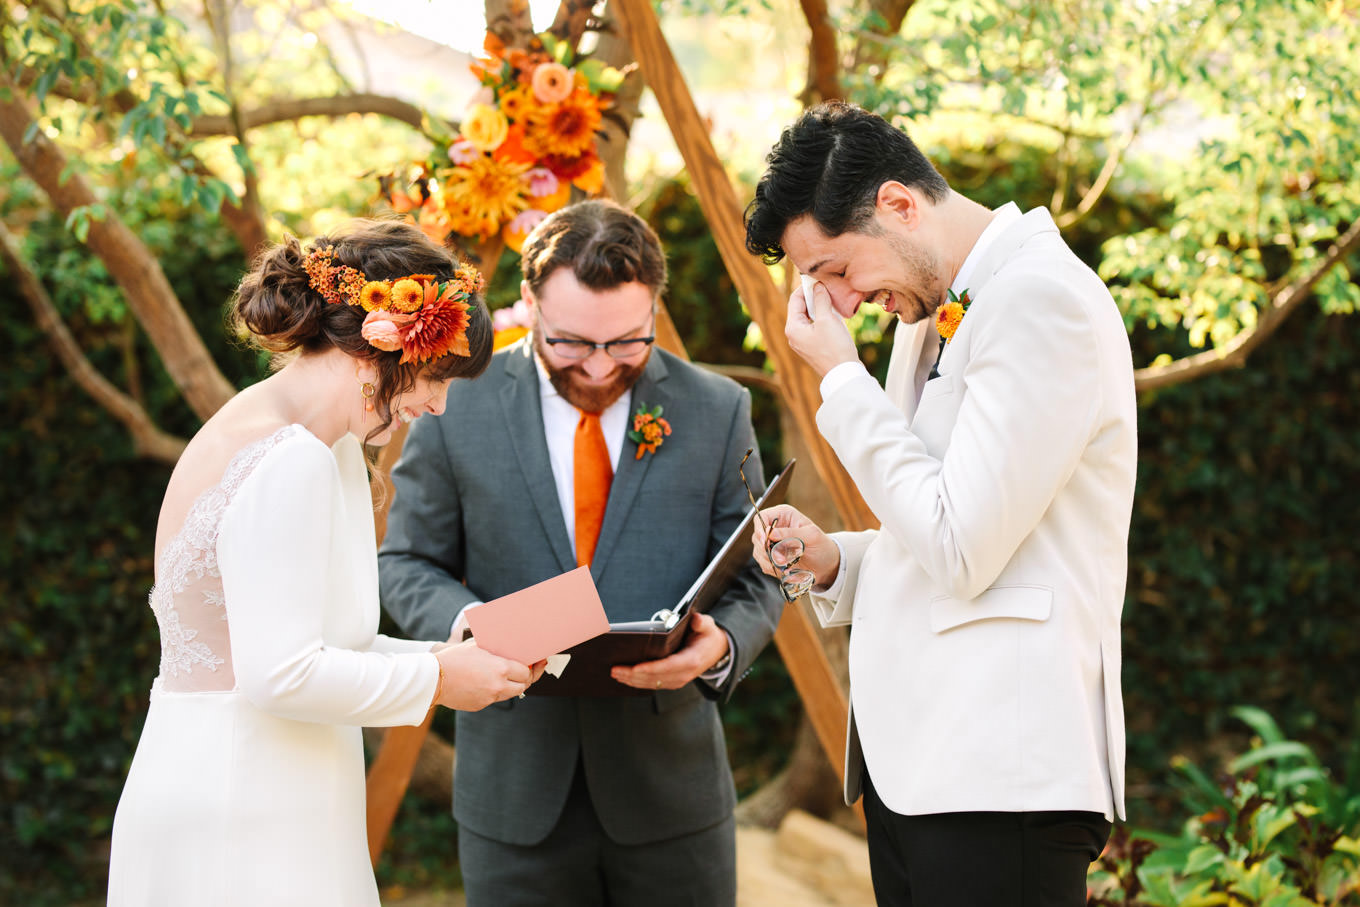 Groom crying during backyard wedding vow exchange | Engagement, elopement, and wedding photography roundup of Mary Costa’s favorite images from 2020 | Colorful and elevated photography for fun-loving couples in Southern California | #2020wedding #elopement #weddingphoto #weddingphotography #microwedding   Source: Mary Costa Photography | Los Angeles